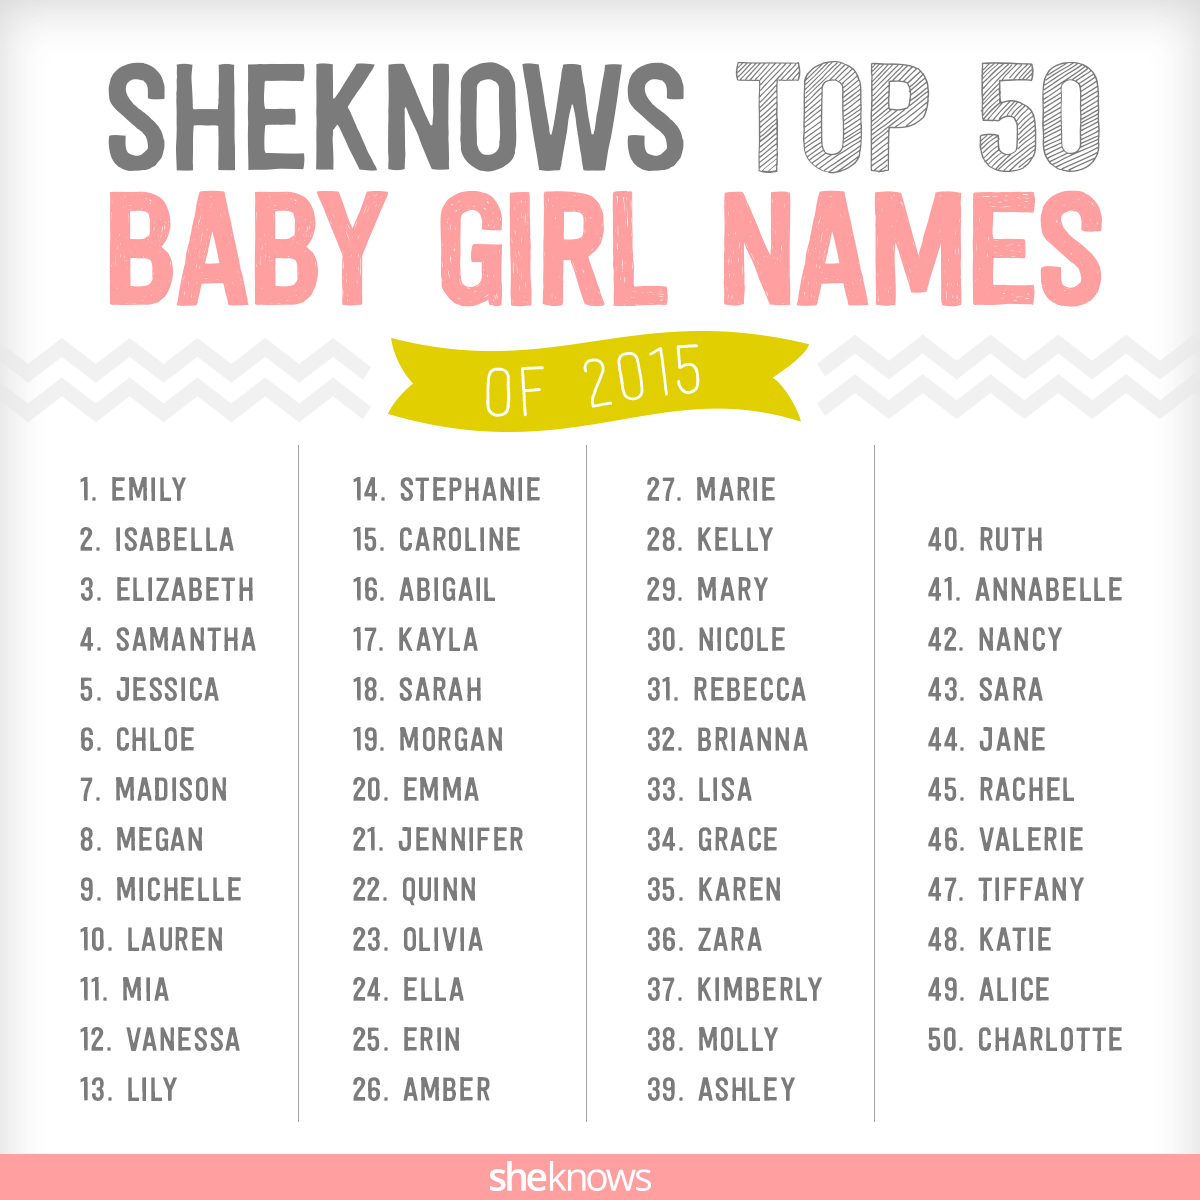 The hottest baby girl name trend in 2015